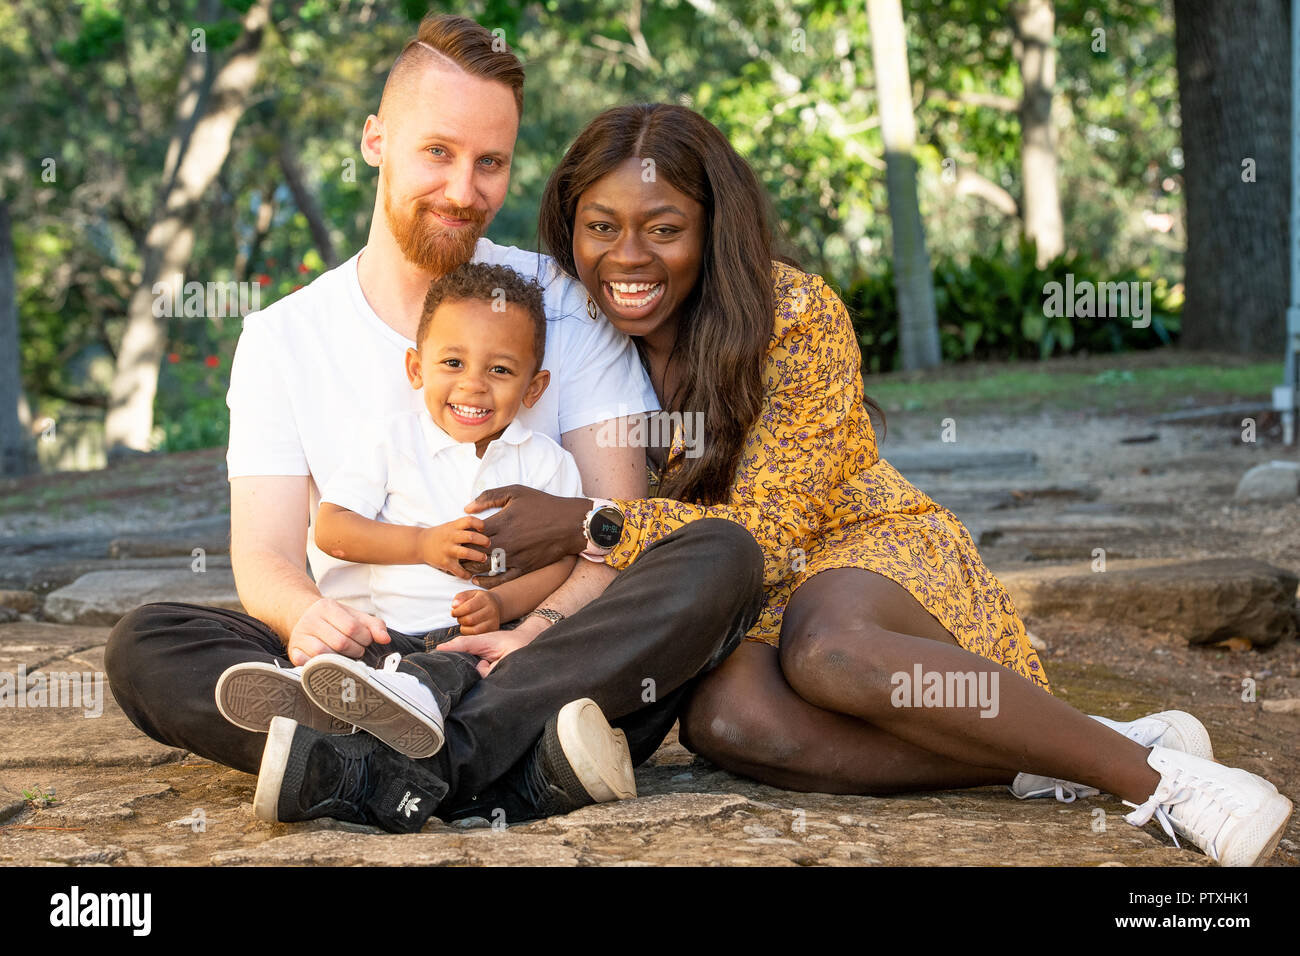 Multi racial family photoshoot in a park Stock Photo